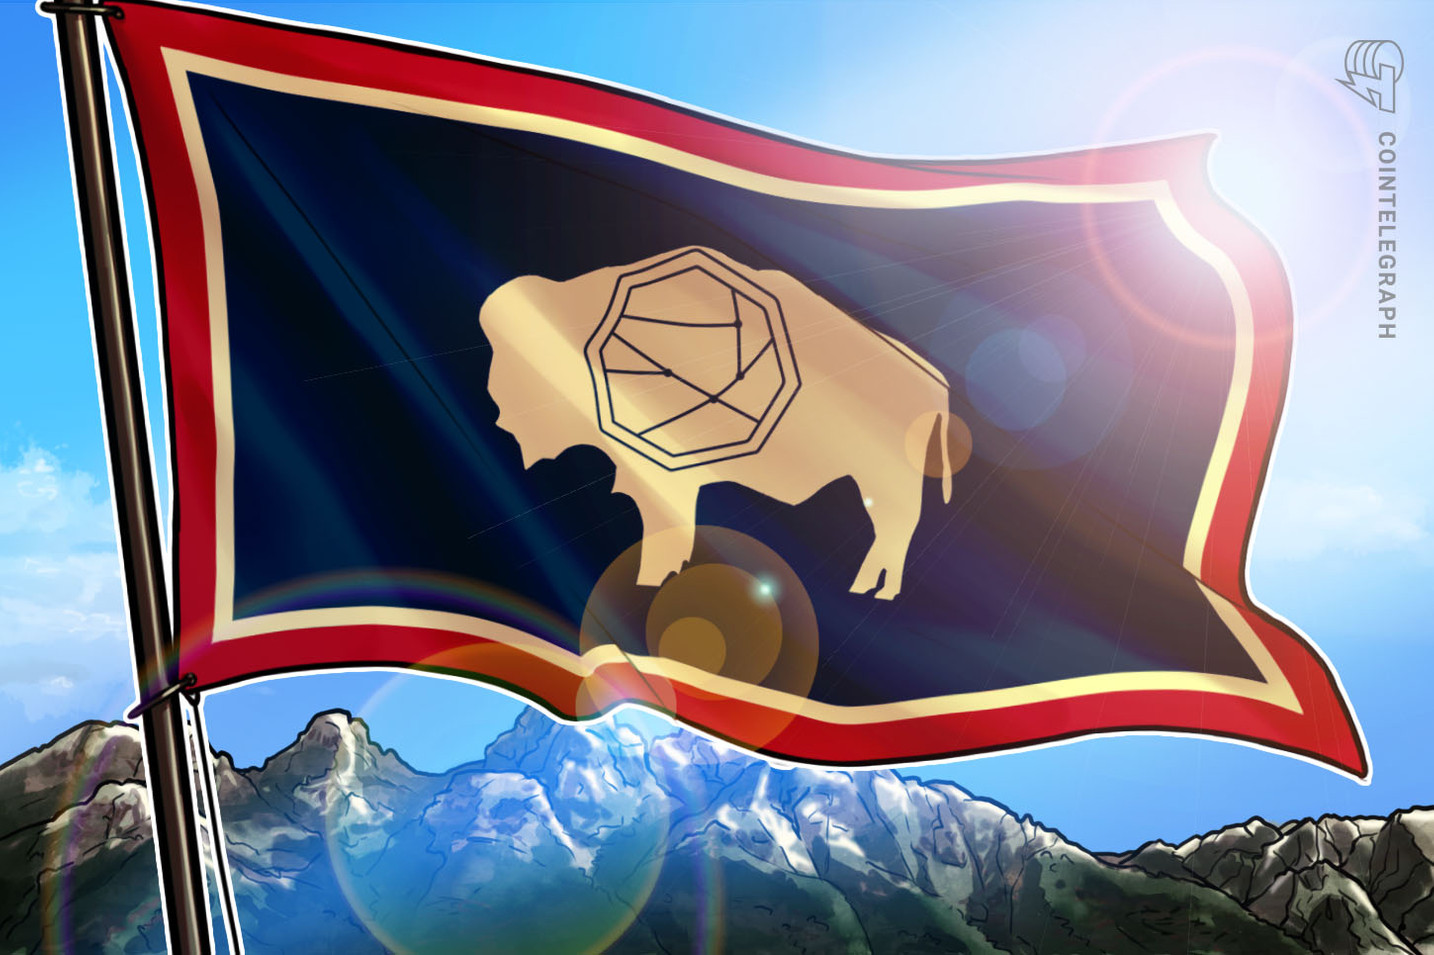 Wyoming seeks ‘stable token’ commission head in first steps to establish state stablecoin